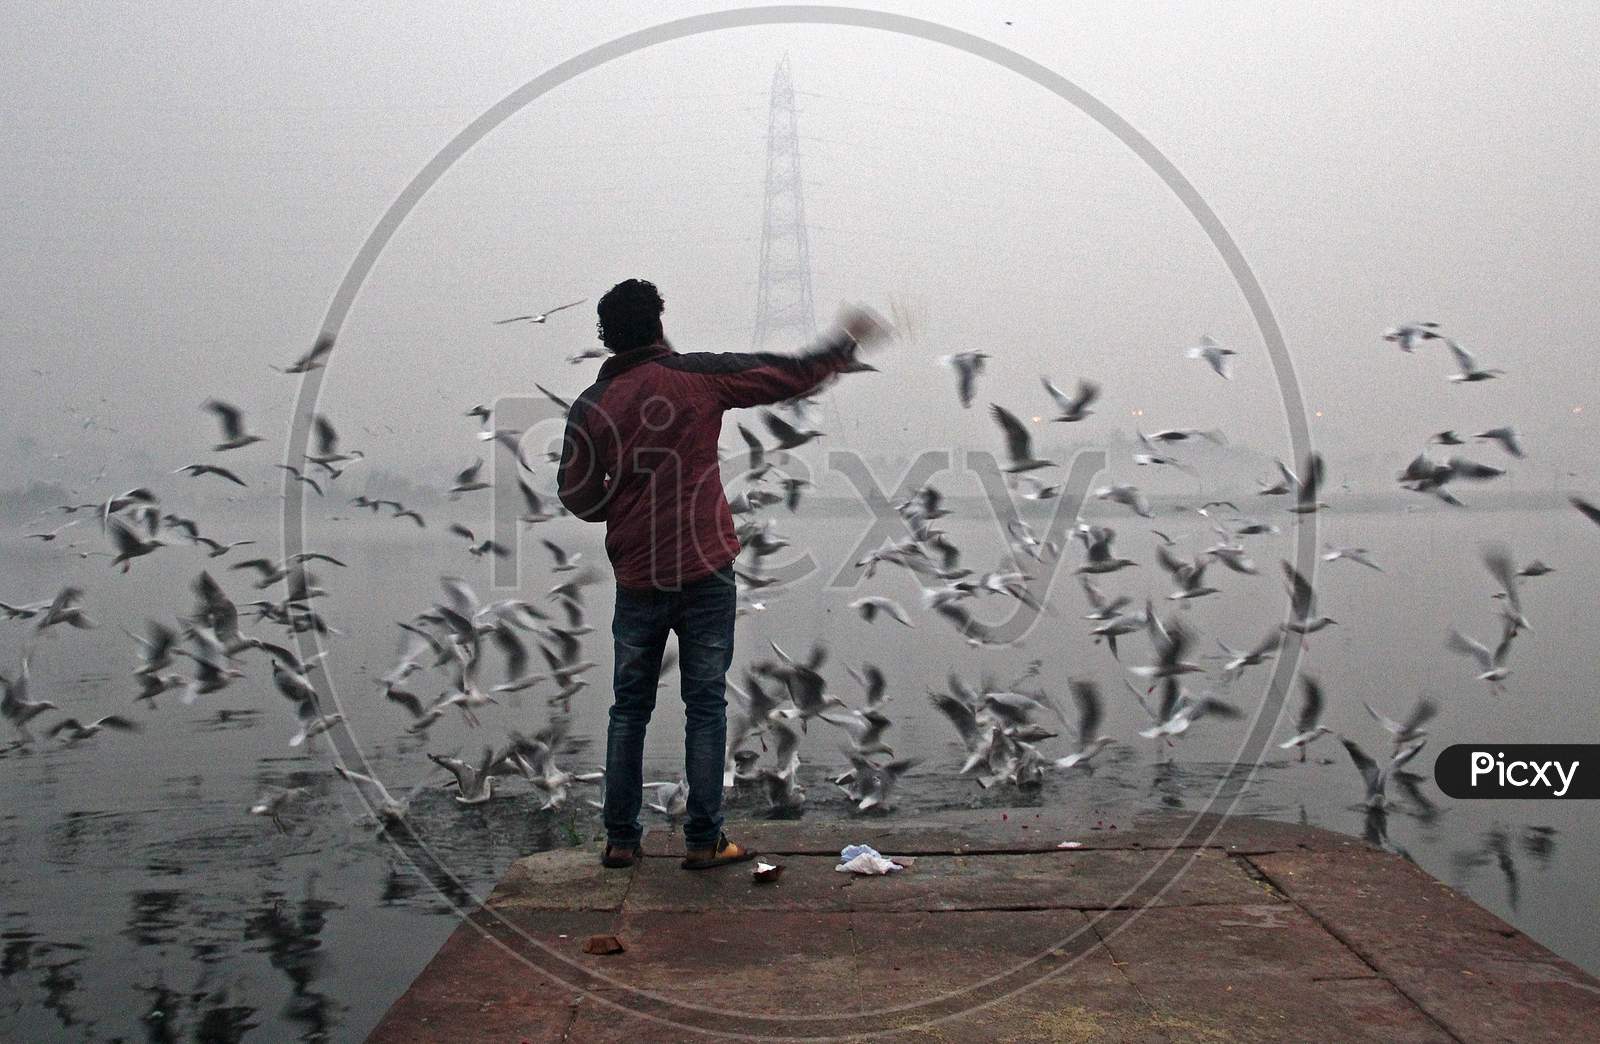 A man feeds seagulls at the Yamuna river on a smoggy morning in New Delhi, November 9, 2020.